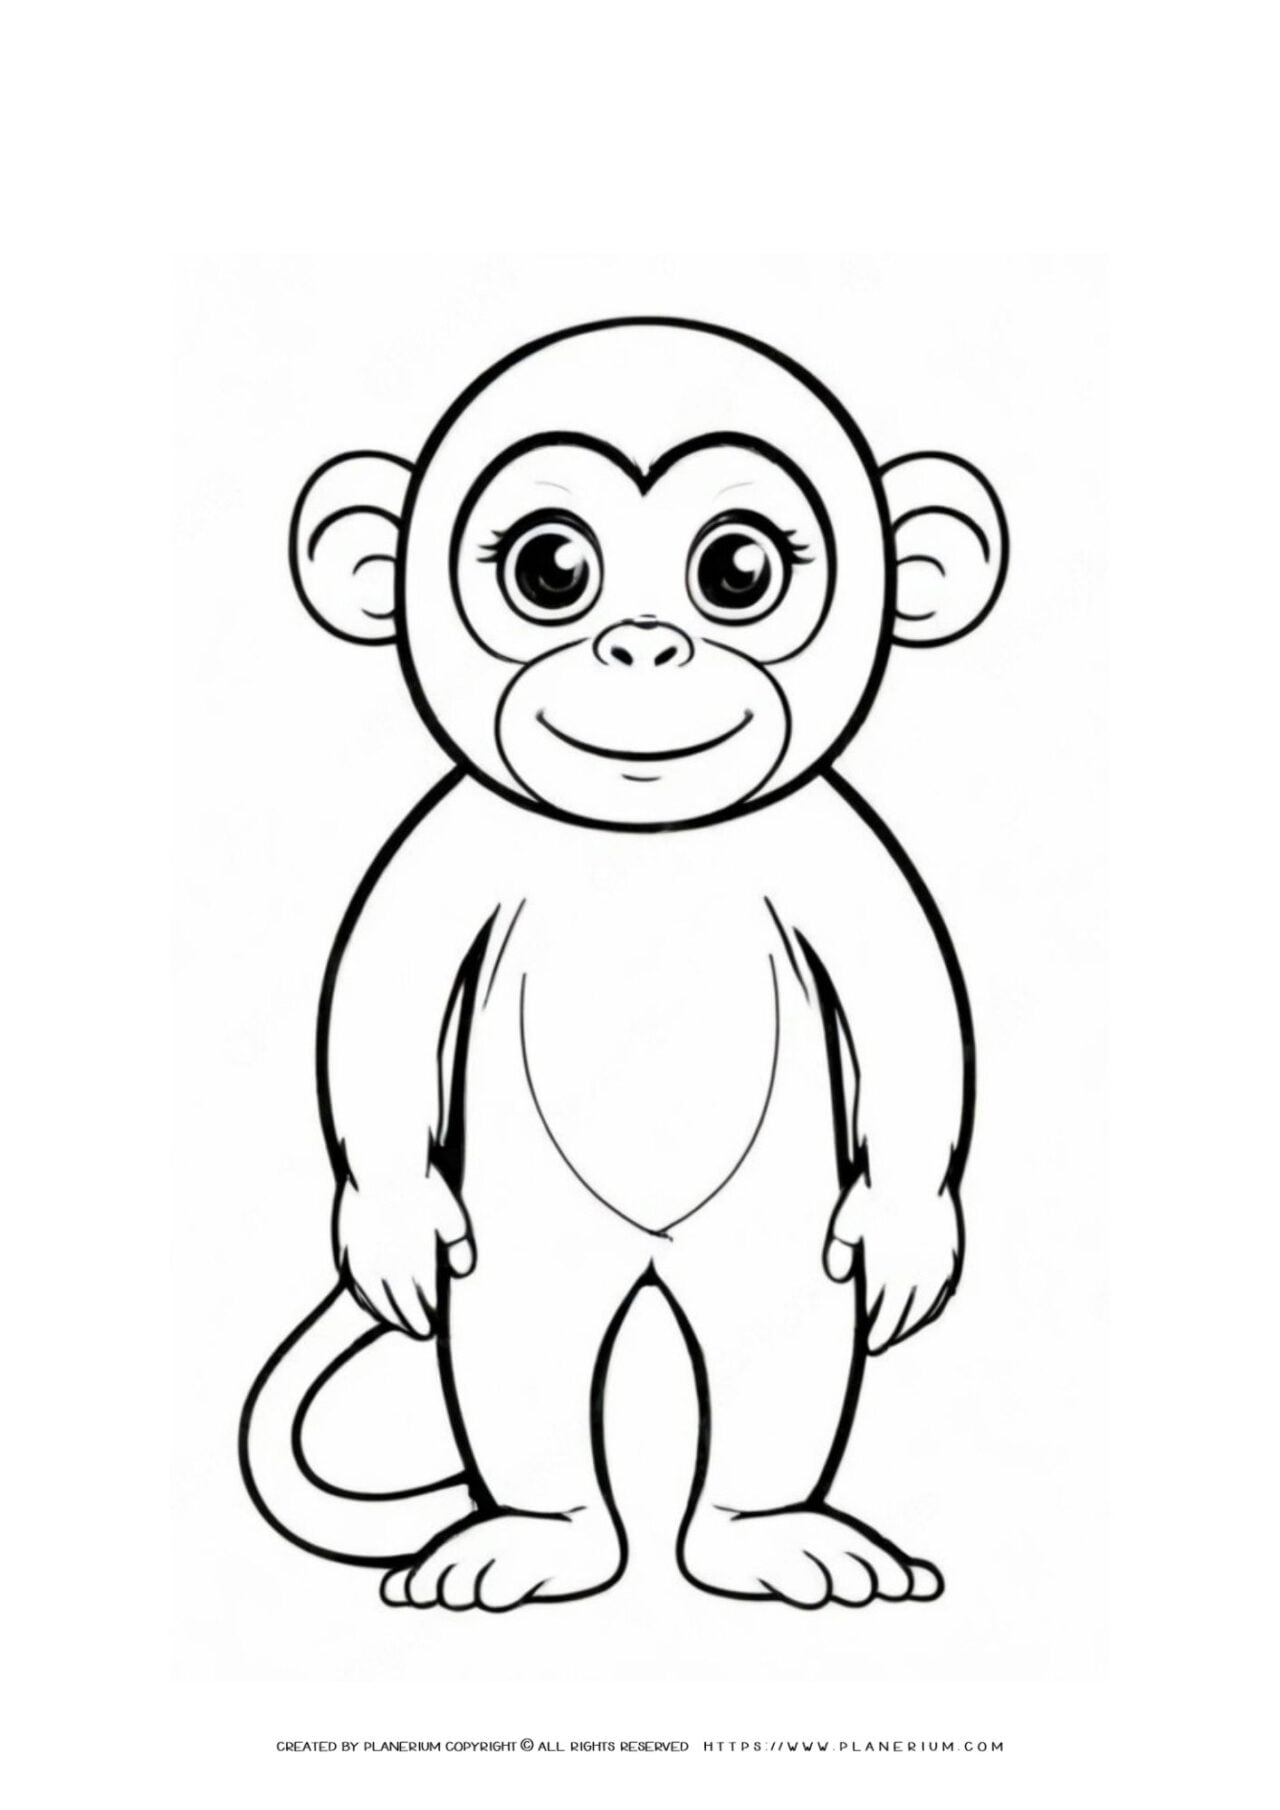 Cartoon monkey line drawing for coloring.